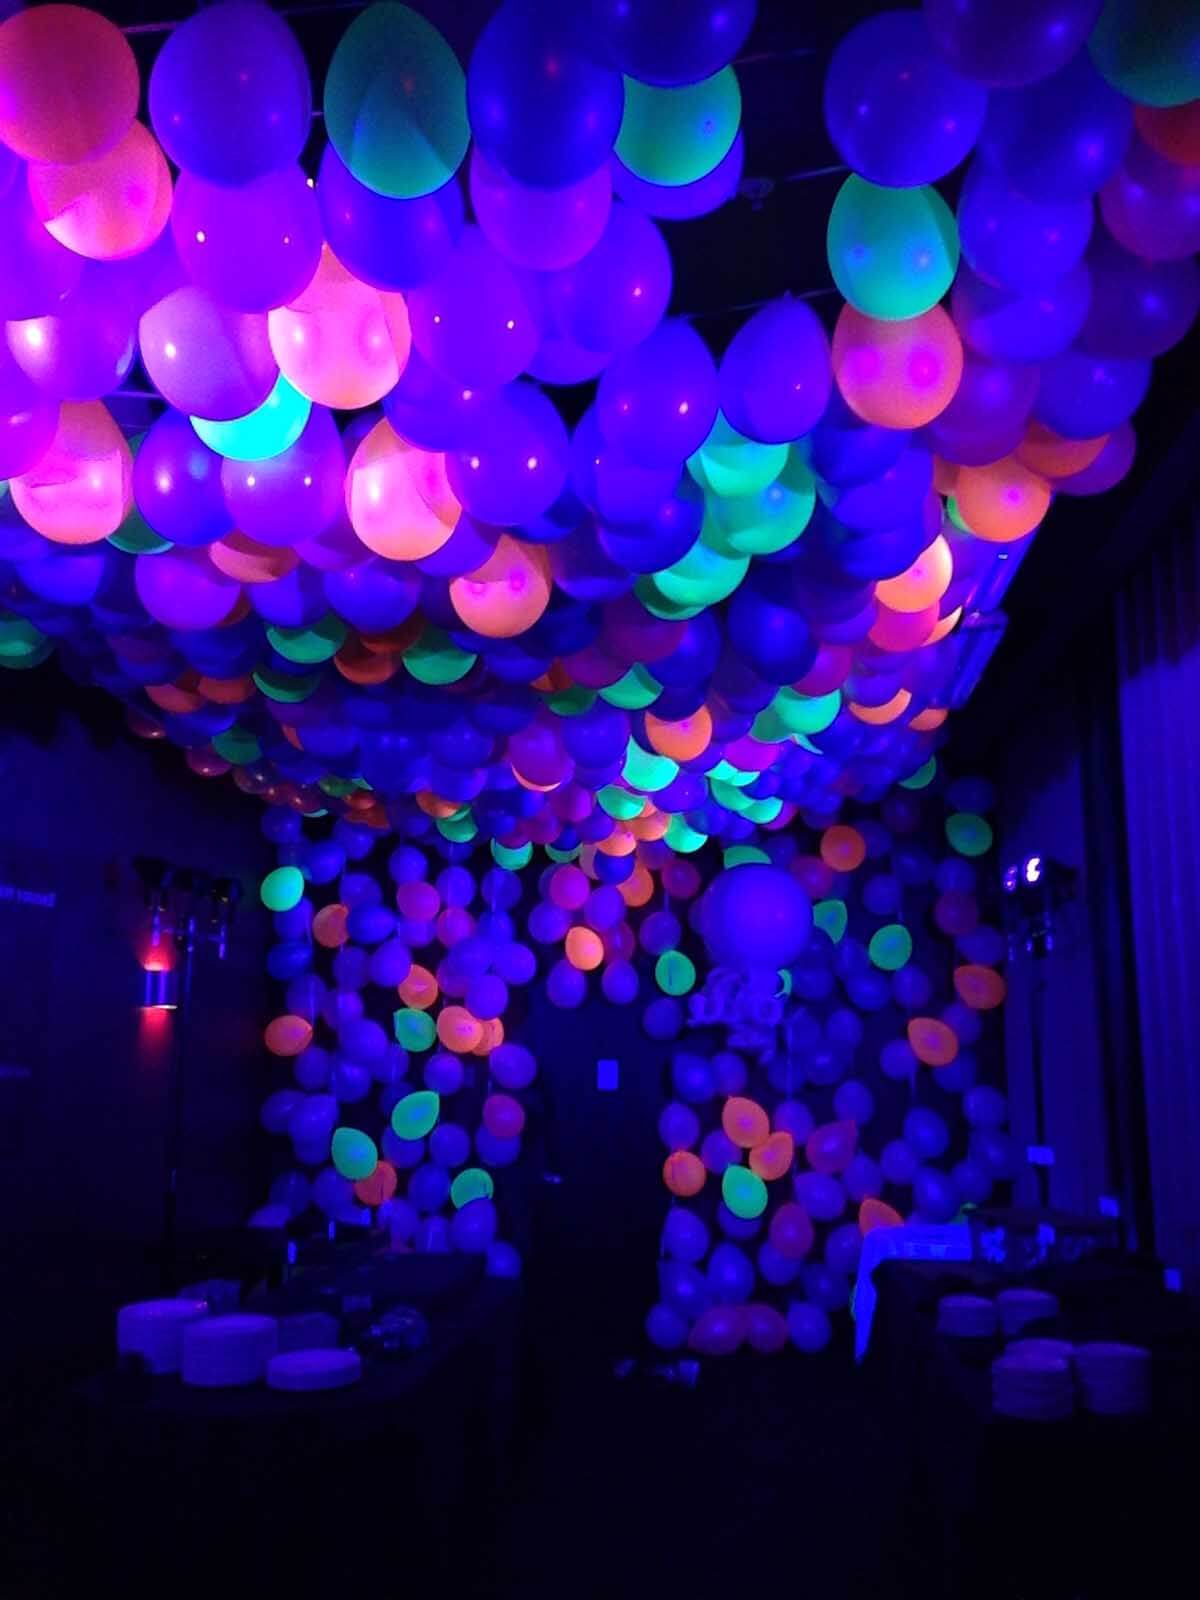 Glow in The Dark Balloons Make for an Otherworldly Party Atmosphere